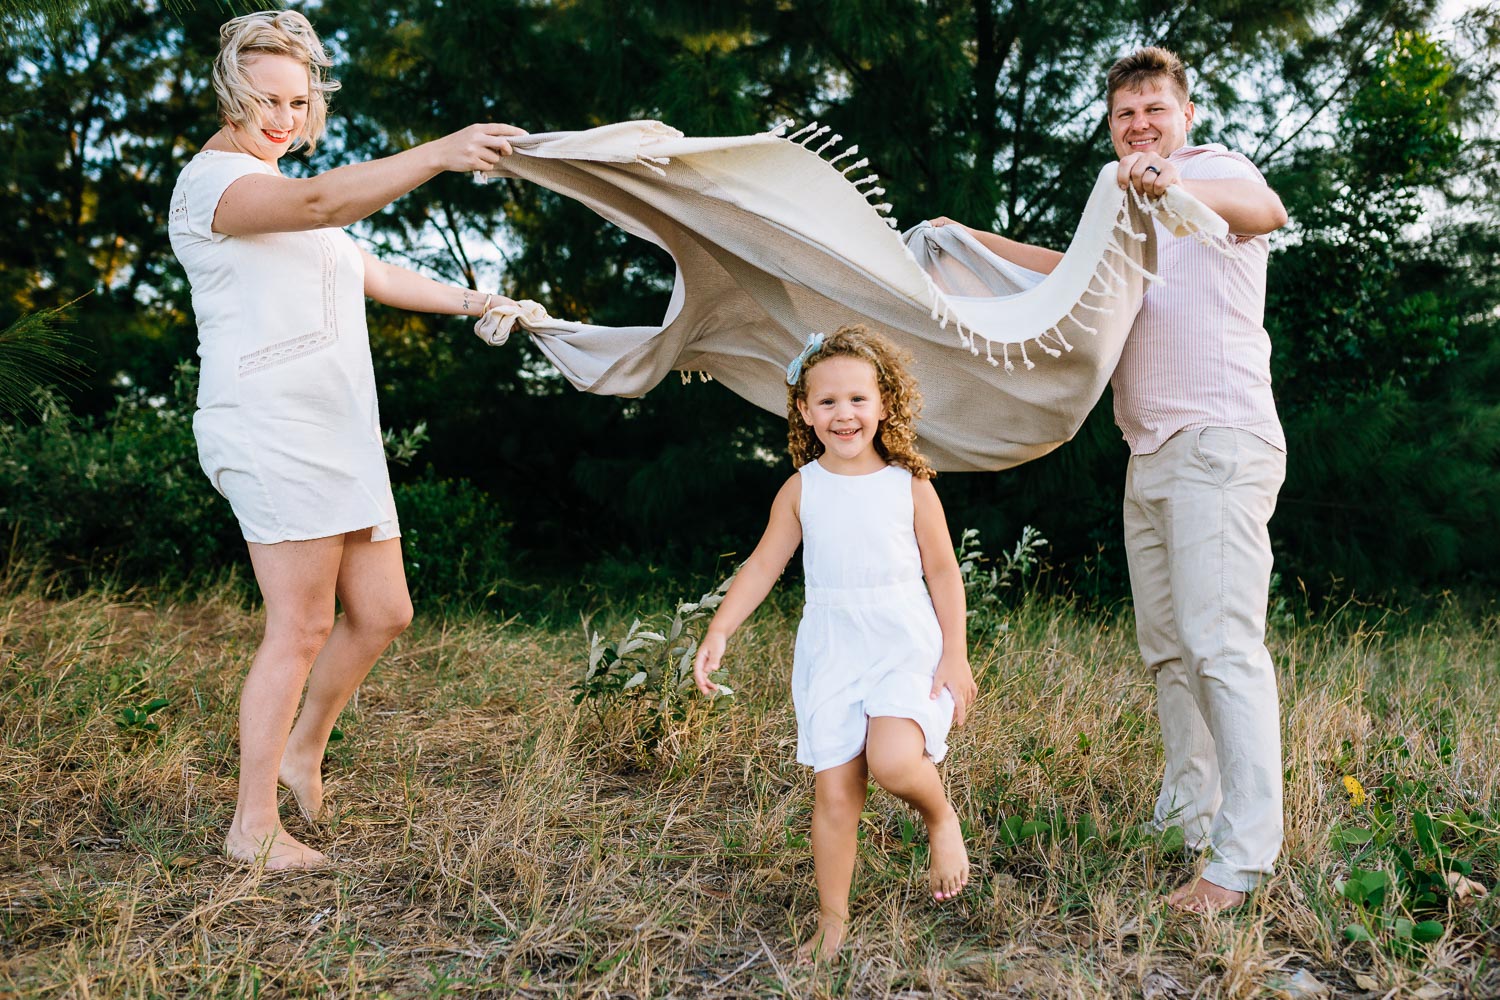 The De Beers ➳ Family Portraits — Abigail Smith Photography